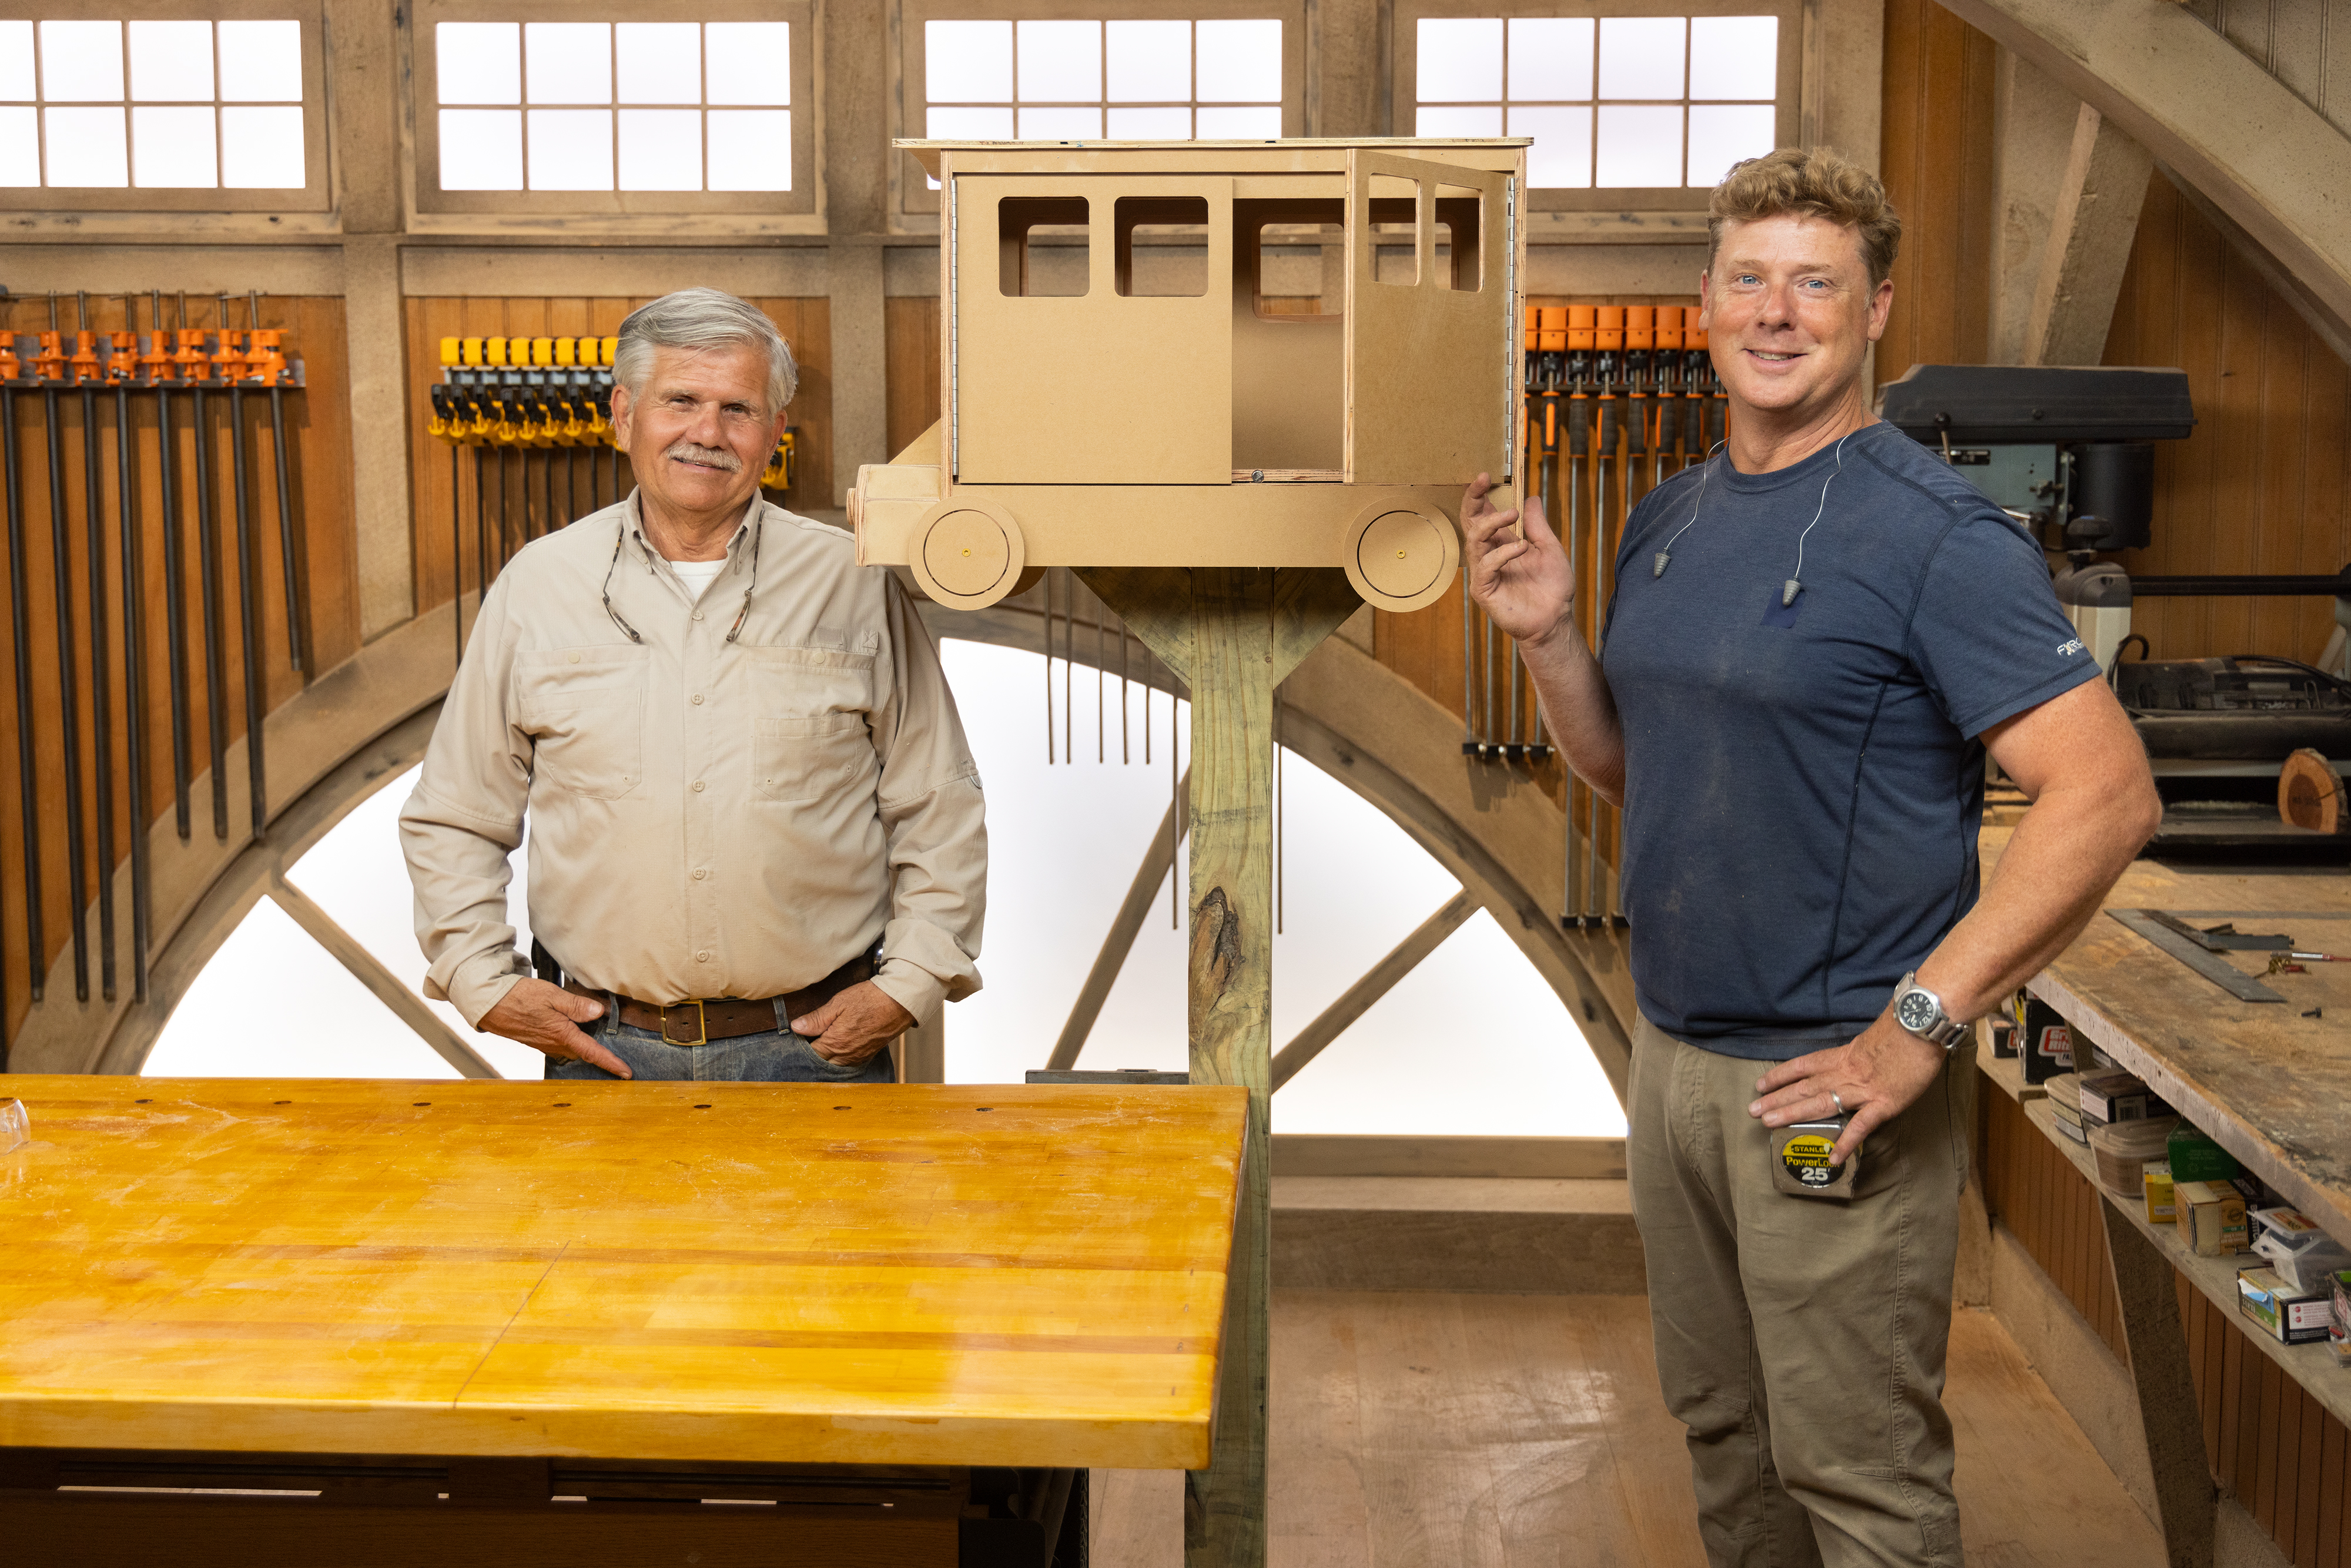 S21 E8, Tom Silva and Kevin O’Connor build a little free library